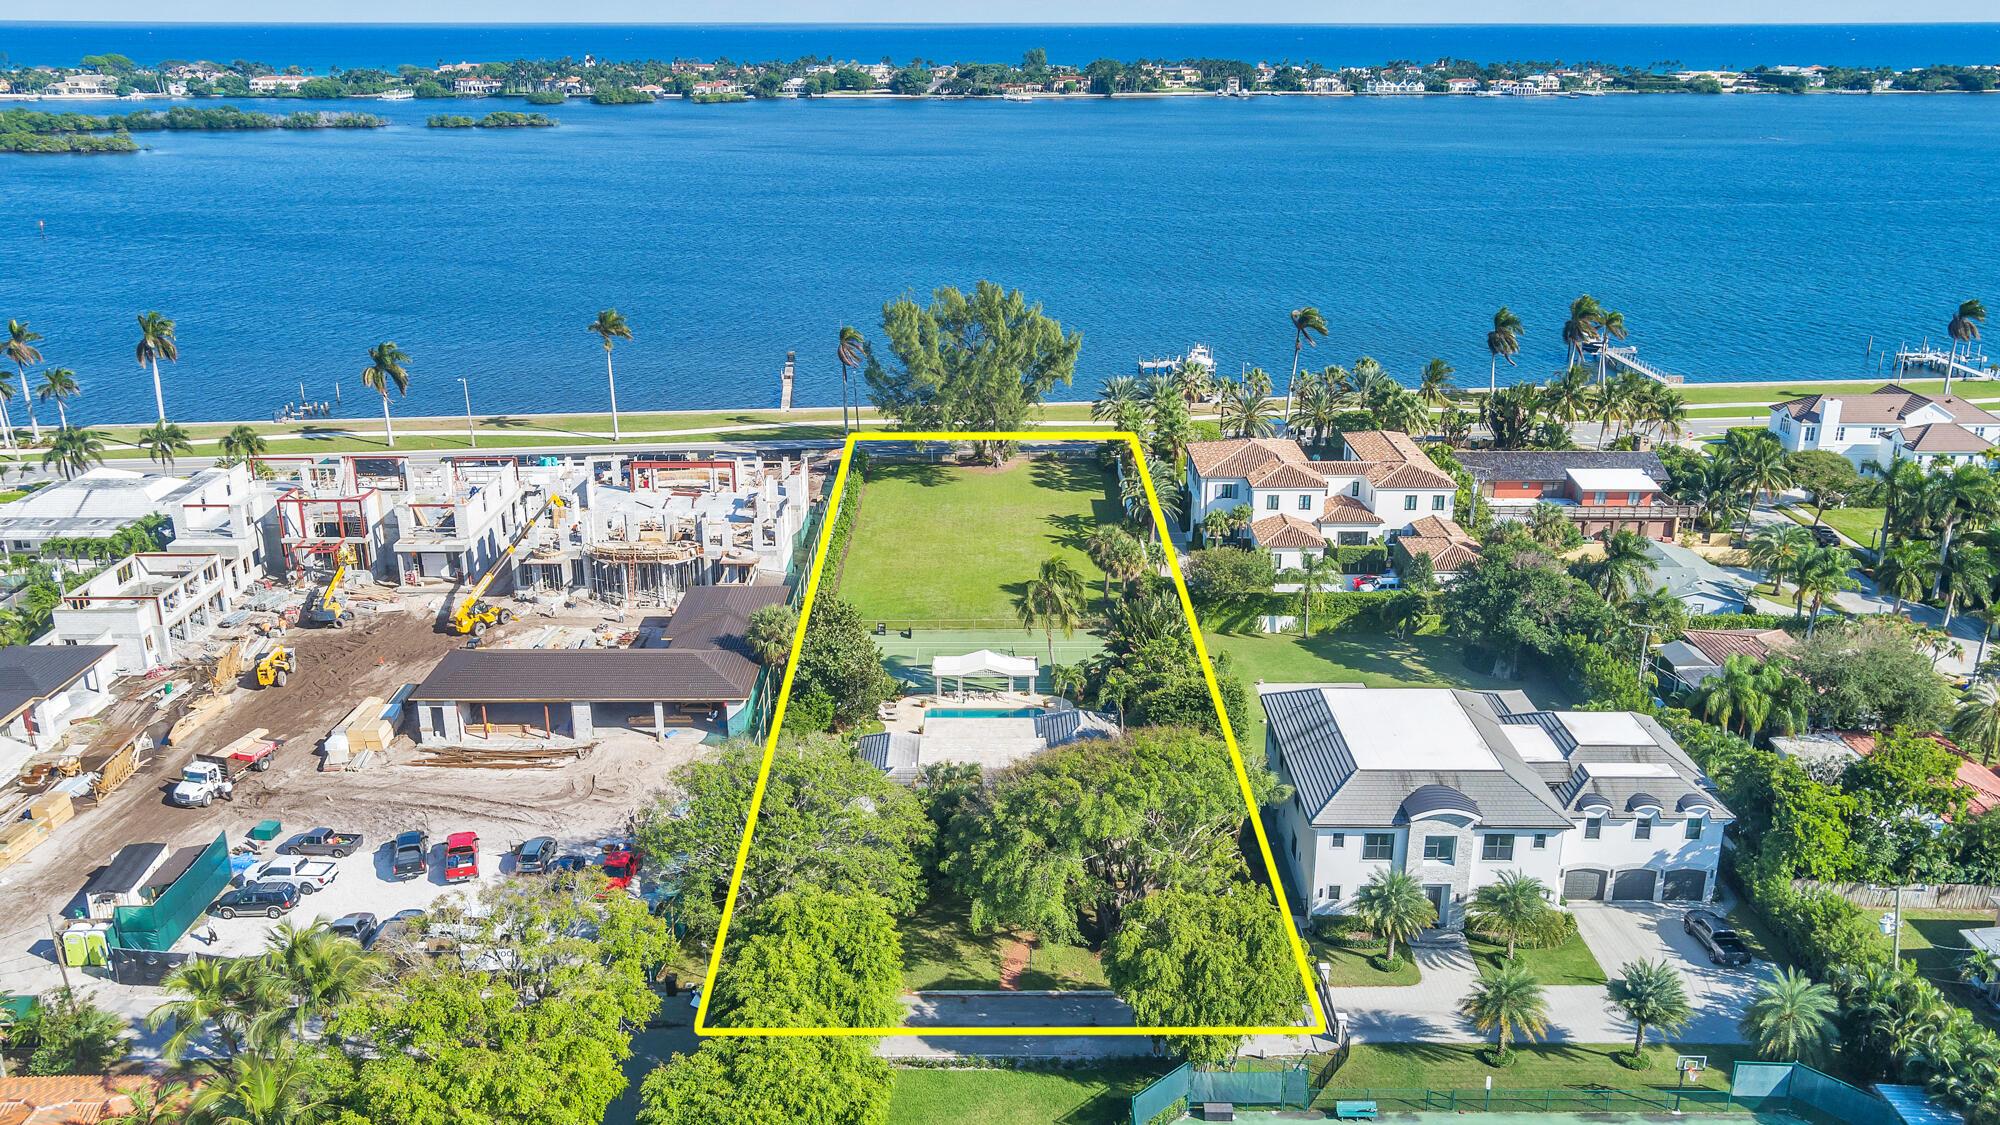 Incredible waterfront opportunity South of Southern. This 1.18+ acre lot is located directly across South Flagler Drive boasting Intracoastal Waterway views. The home is comprised of 3,558 sq ft, 3 bedrooms, 3 bathrooms and a den. Don't miss this unique opportunity to build a trophy property in West Palm Beach.